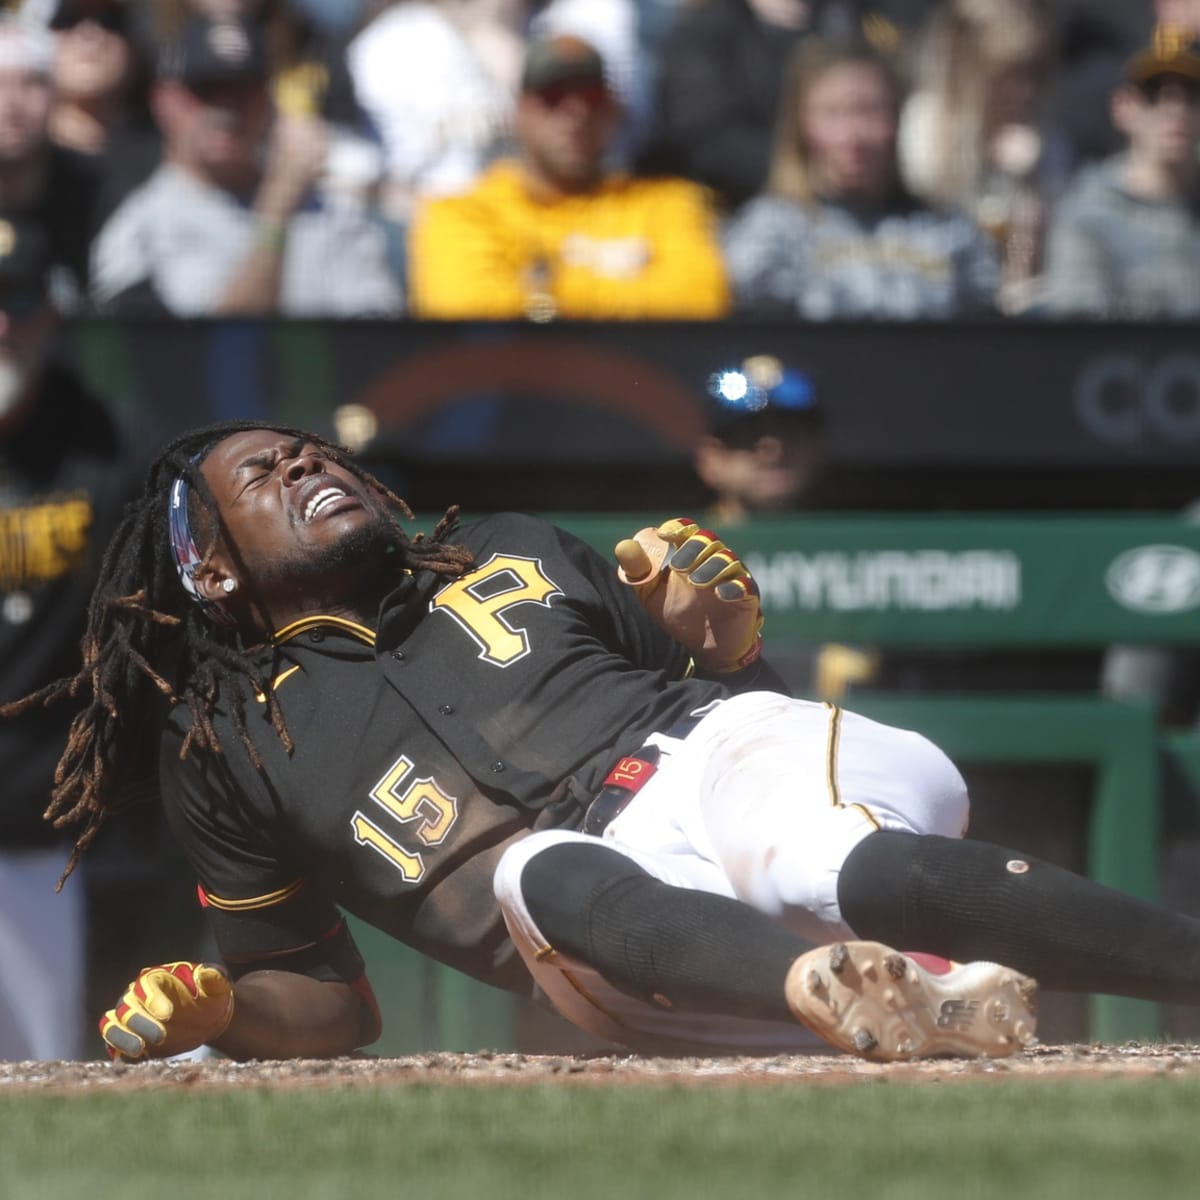 Pirates' Oneil Cruz breaks ankle in home plate collision vs. White